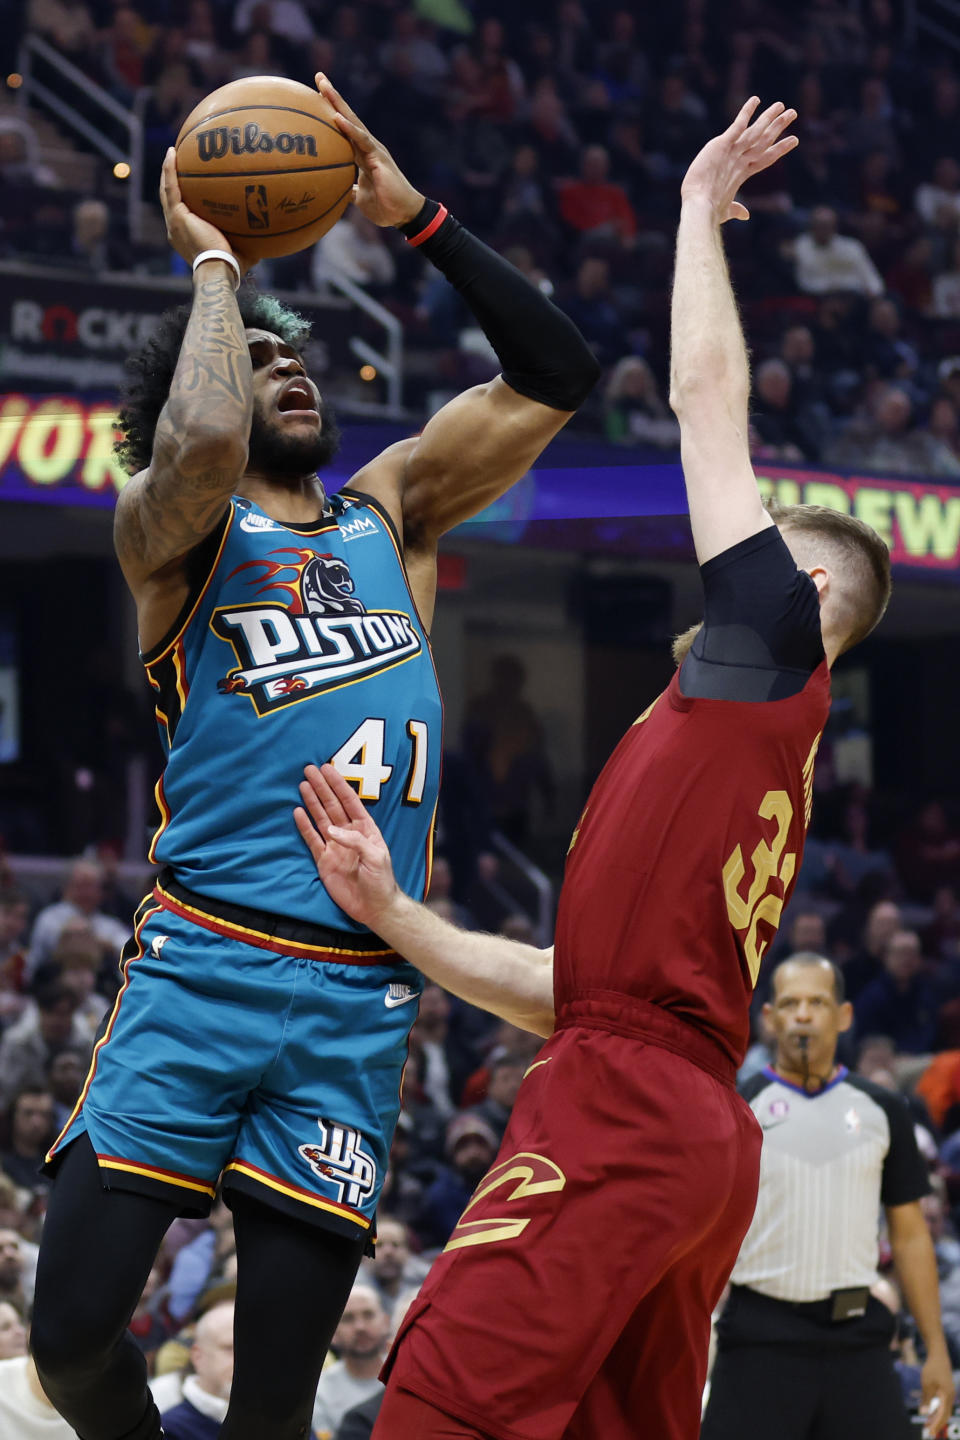 Detroit Pistons forward Saddiq Bey (41) shoots against Cleveland Cavaliers forward Dean Wade (32) during the first half of an NBA basketball game, Wednesday, Feb. 8, 2023, in Cleveland. (AP Photo/Ron Schwane)